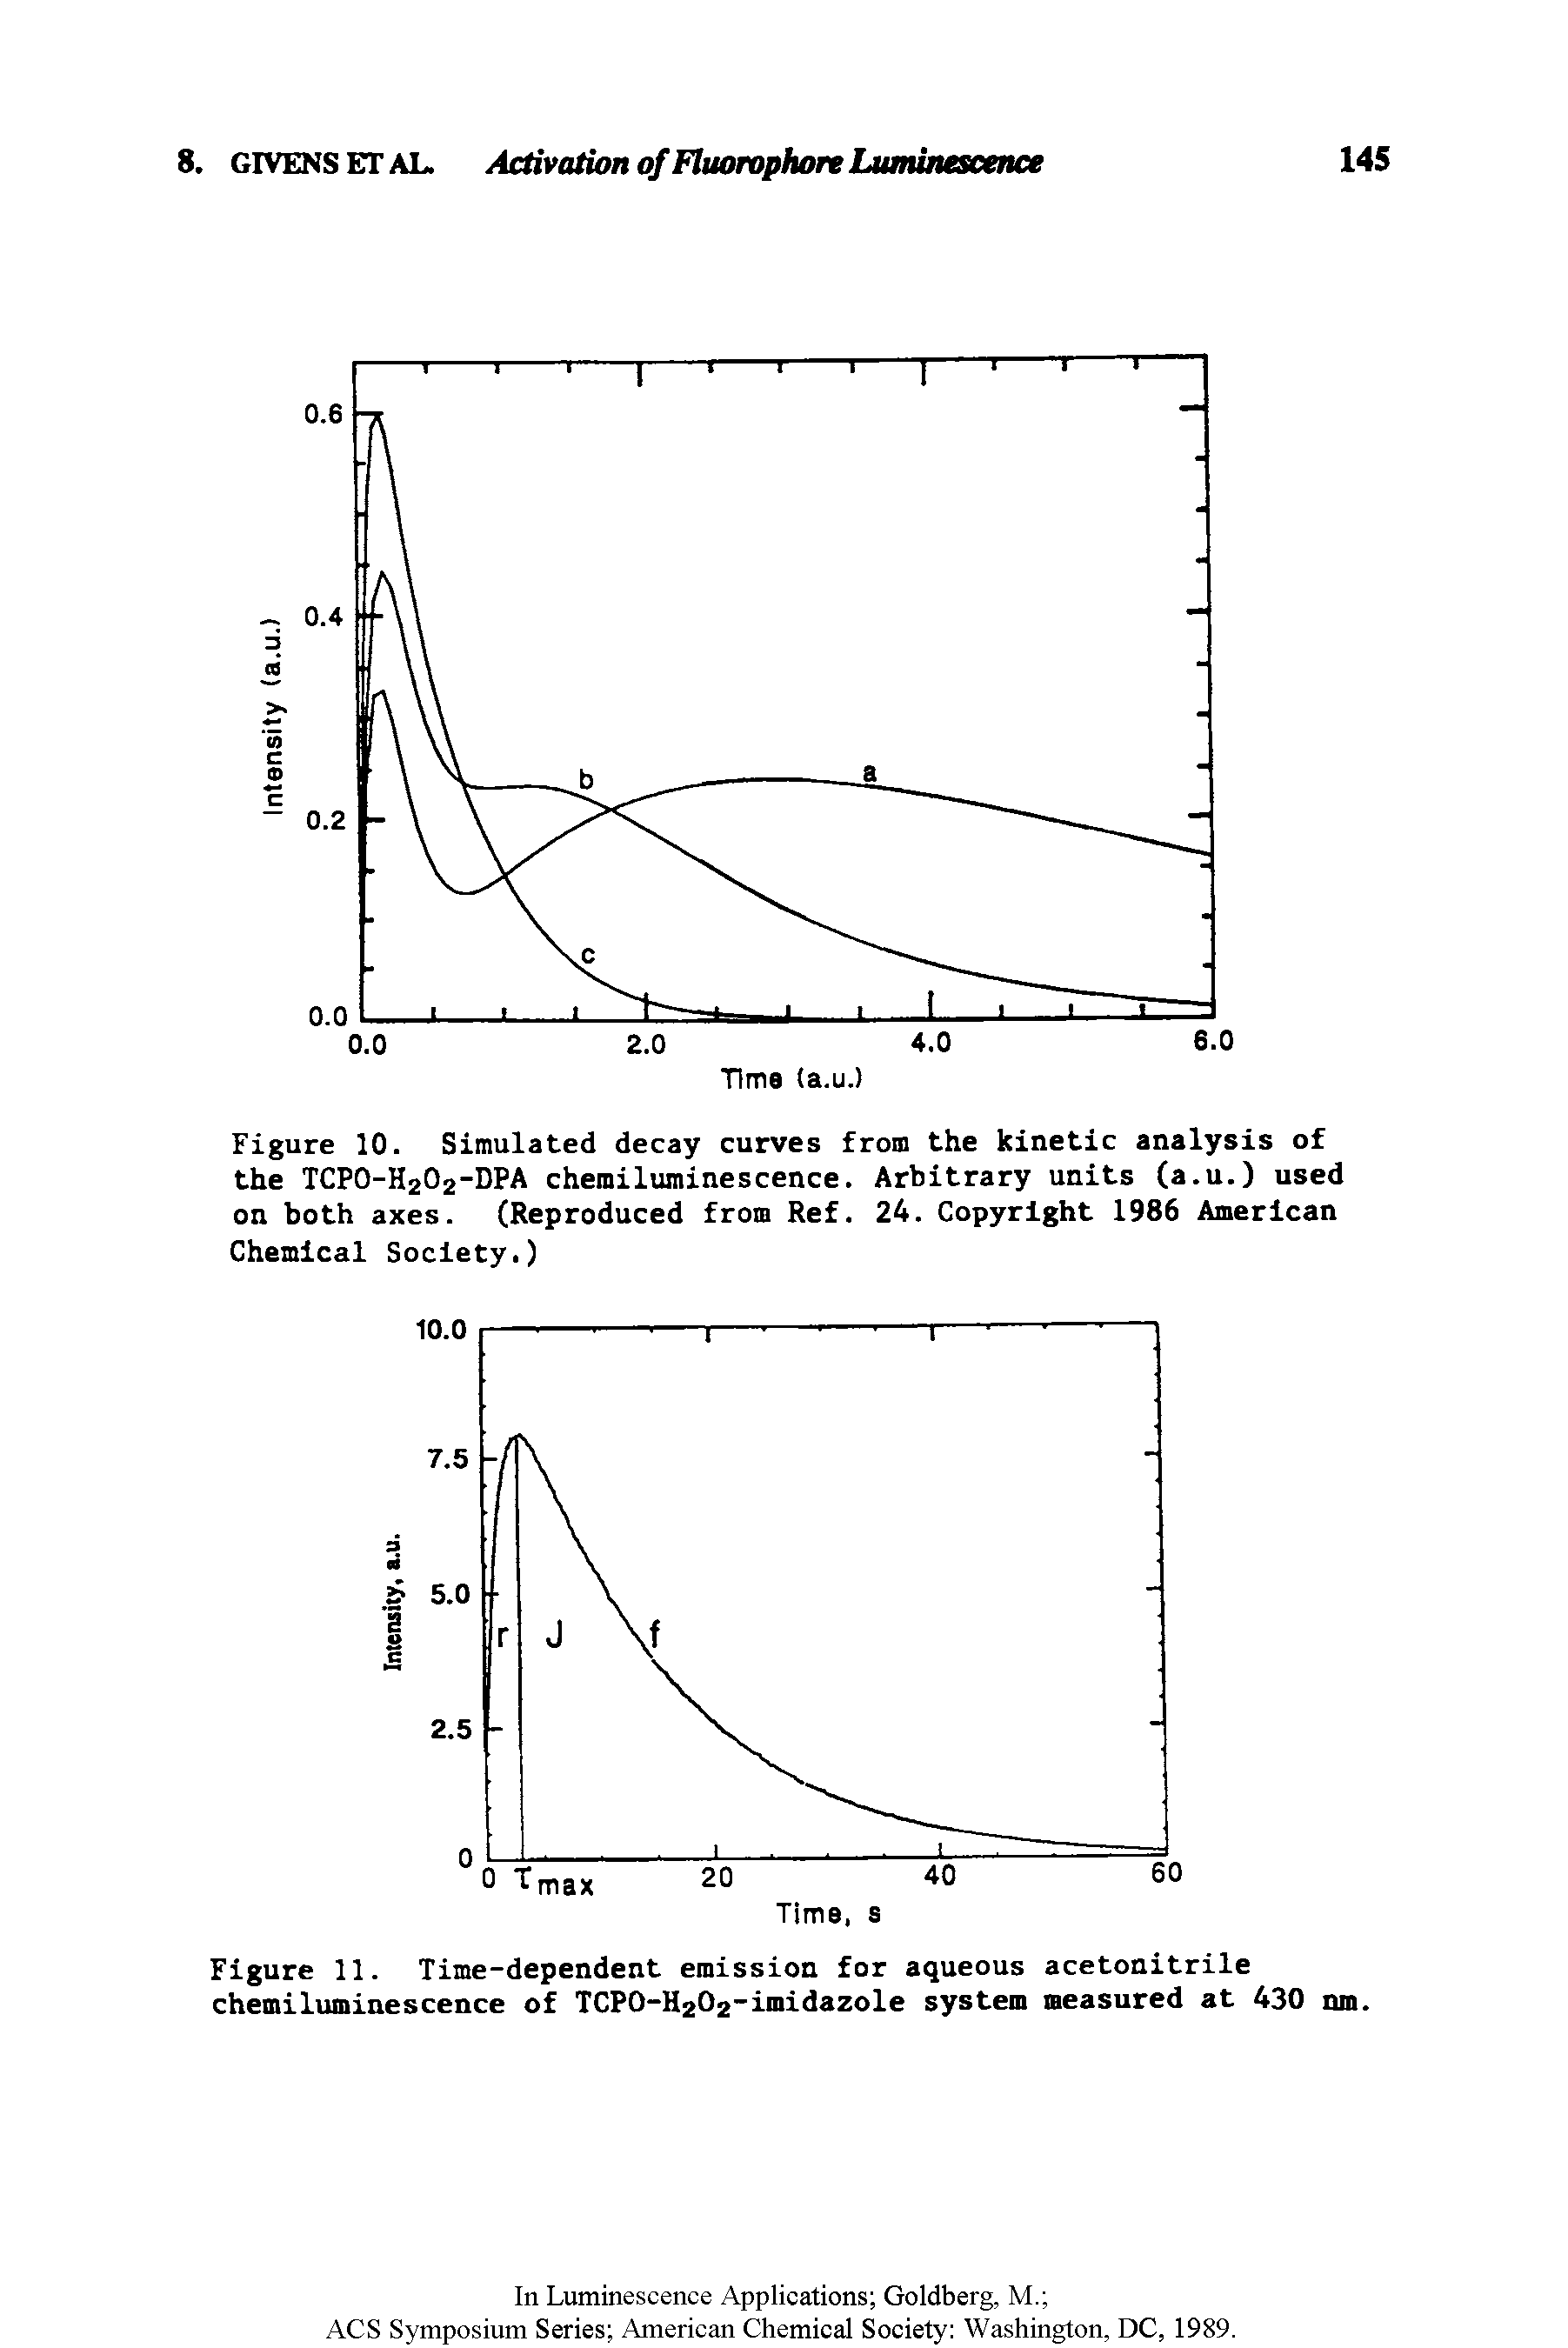 Figure 10. Simulated decay curves from the kinetic analysis of the TCPO-H2O2-DPA chemiluminescence. Arbitrary units (a.u.) used on both axes. (Reproduced from Ref. 24. Copyright 1986 American Chemical Society.)...